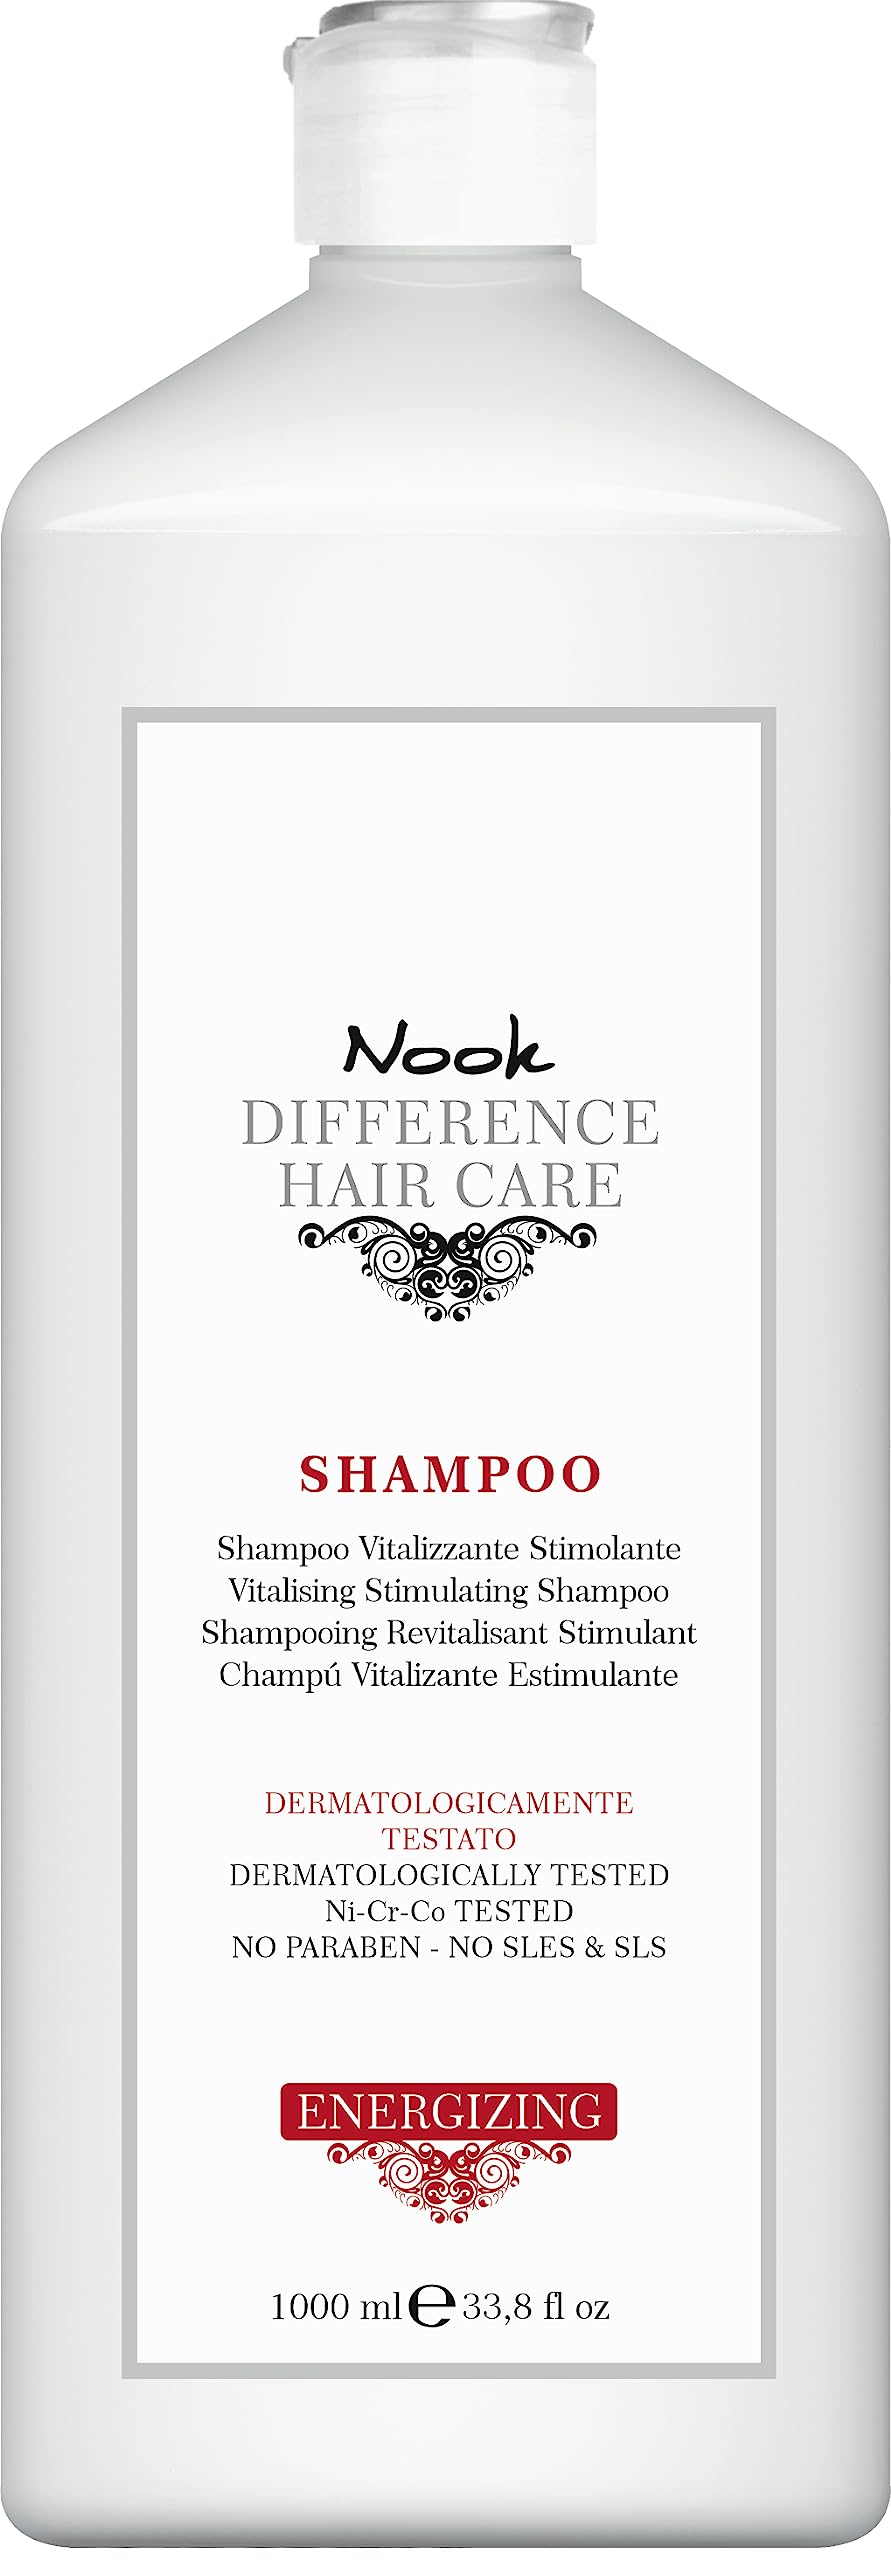 Nook difference Hair Energizing Shampoo 1000 ml